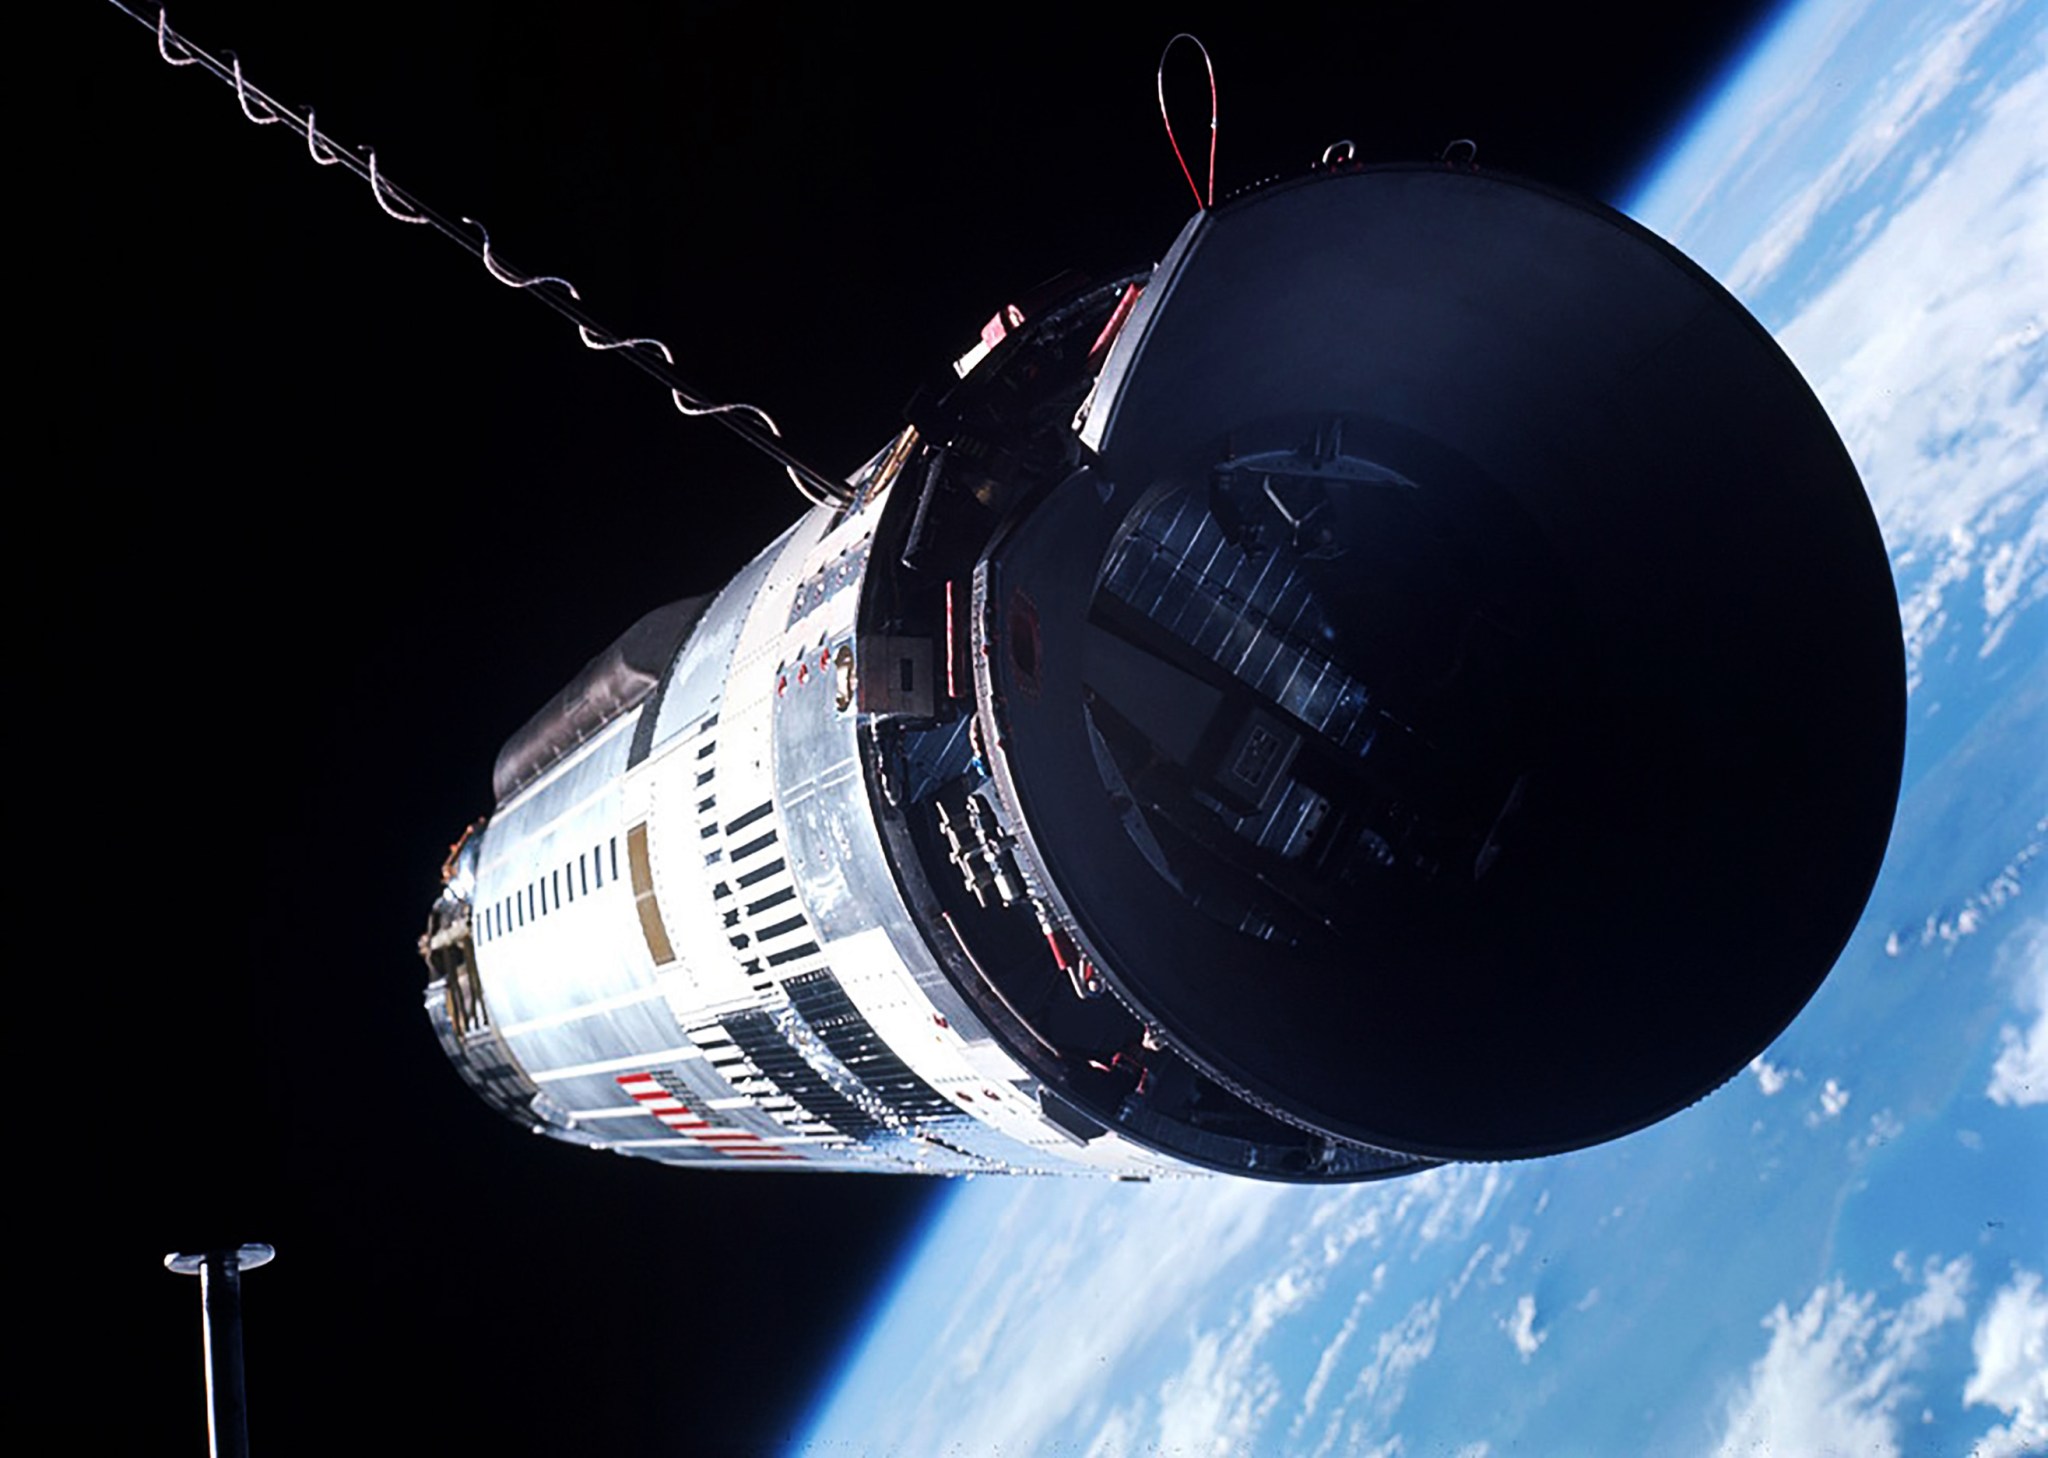 Gemini XII moves in to dock with Agena